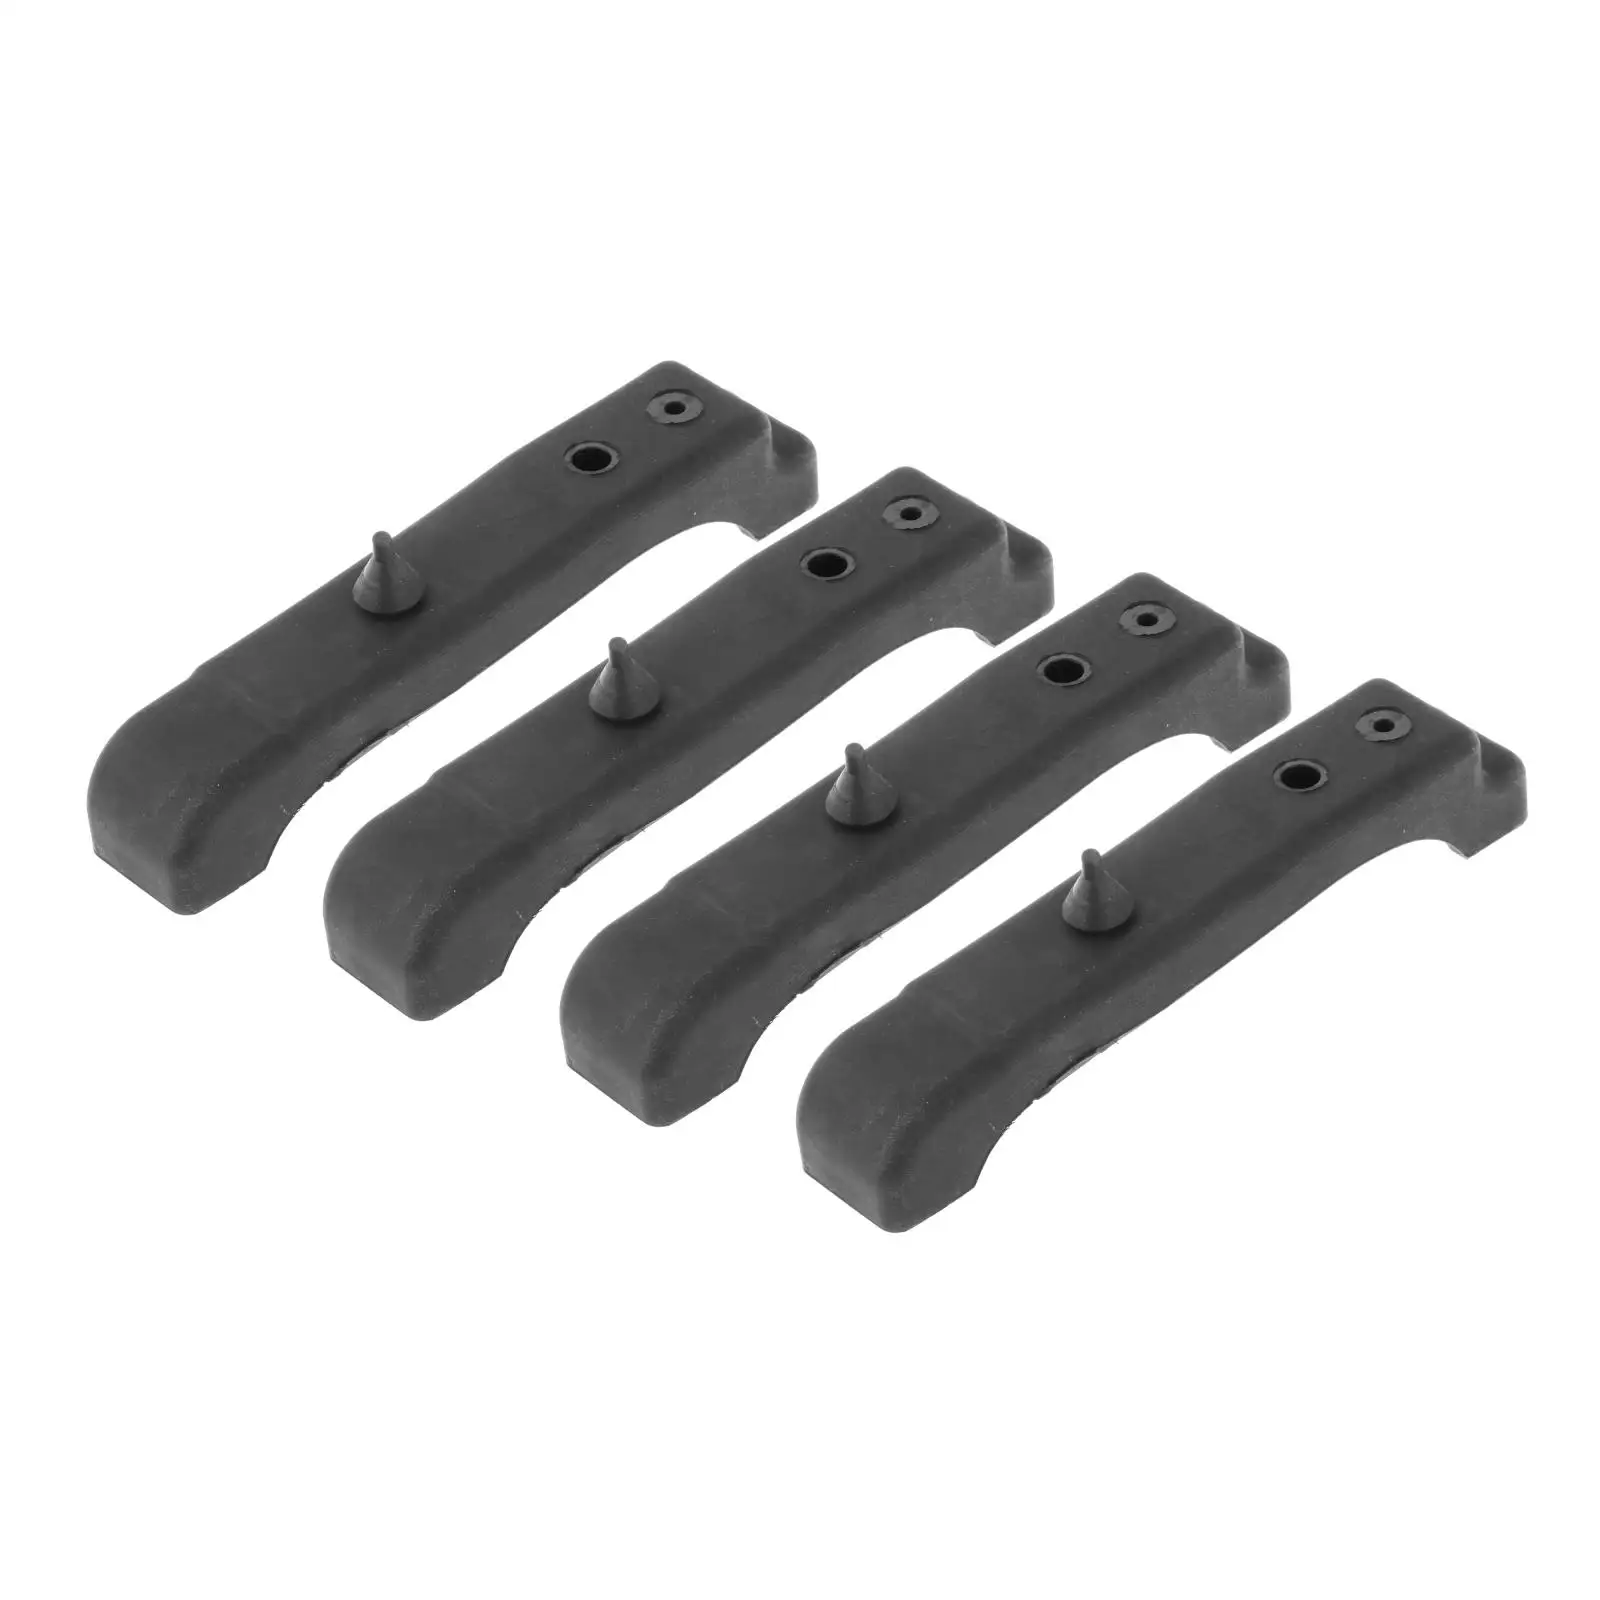 Set of 4 New Cars Rubber 4 Core Radiator Mounting Cushion Support Pad for GM 4012-326-682S